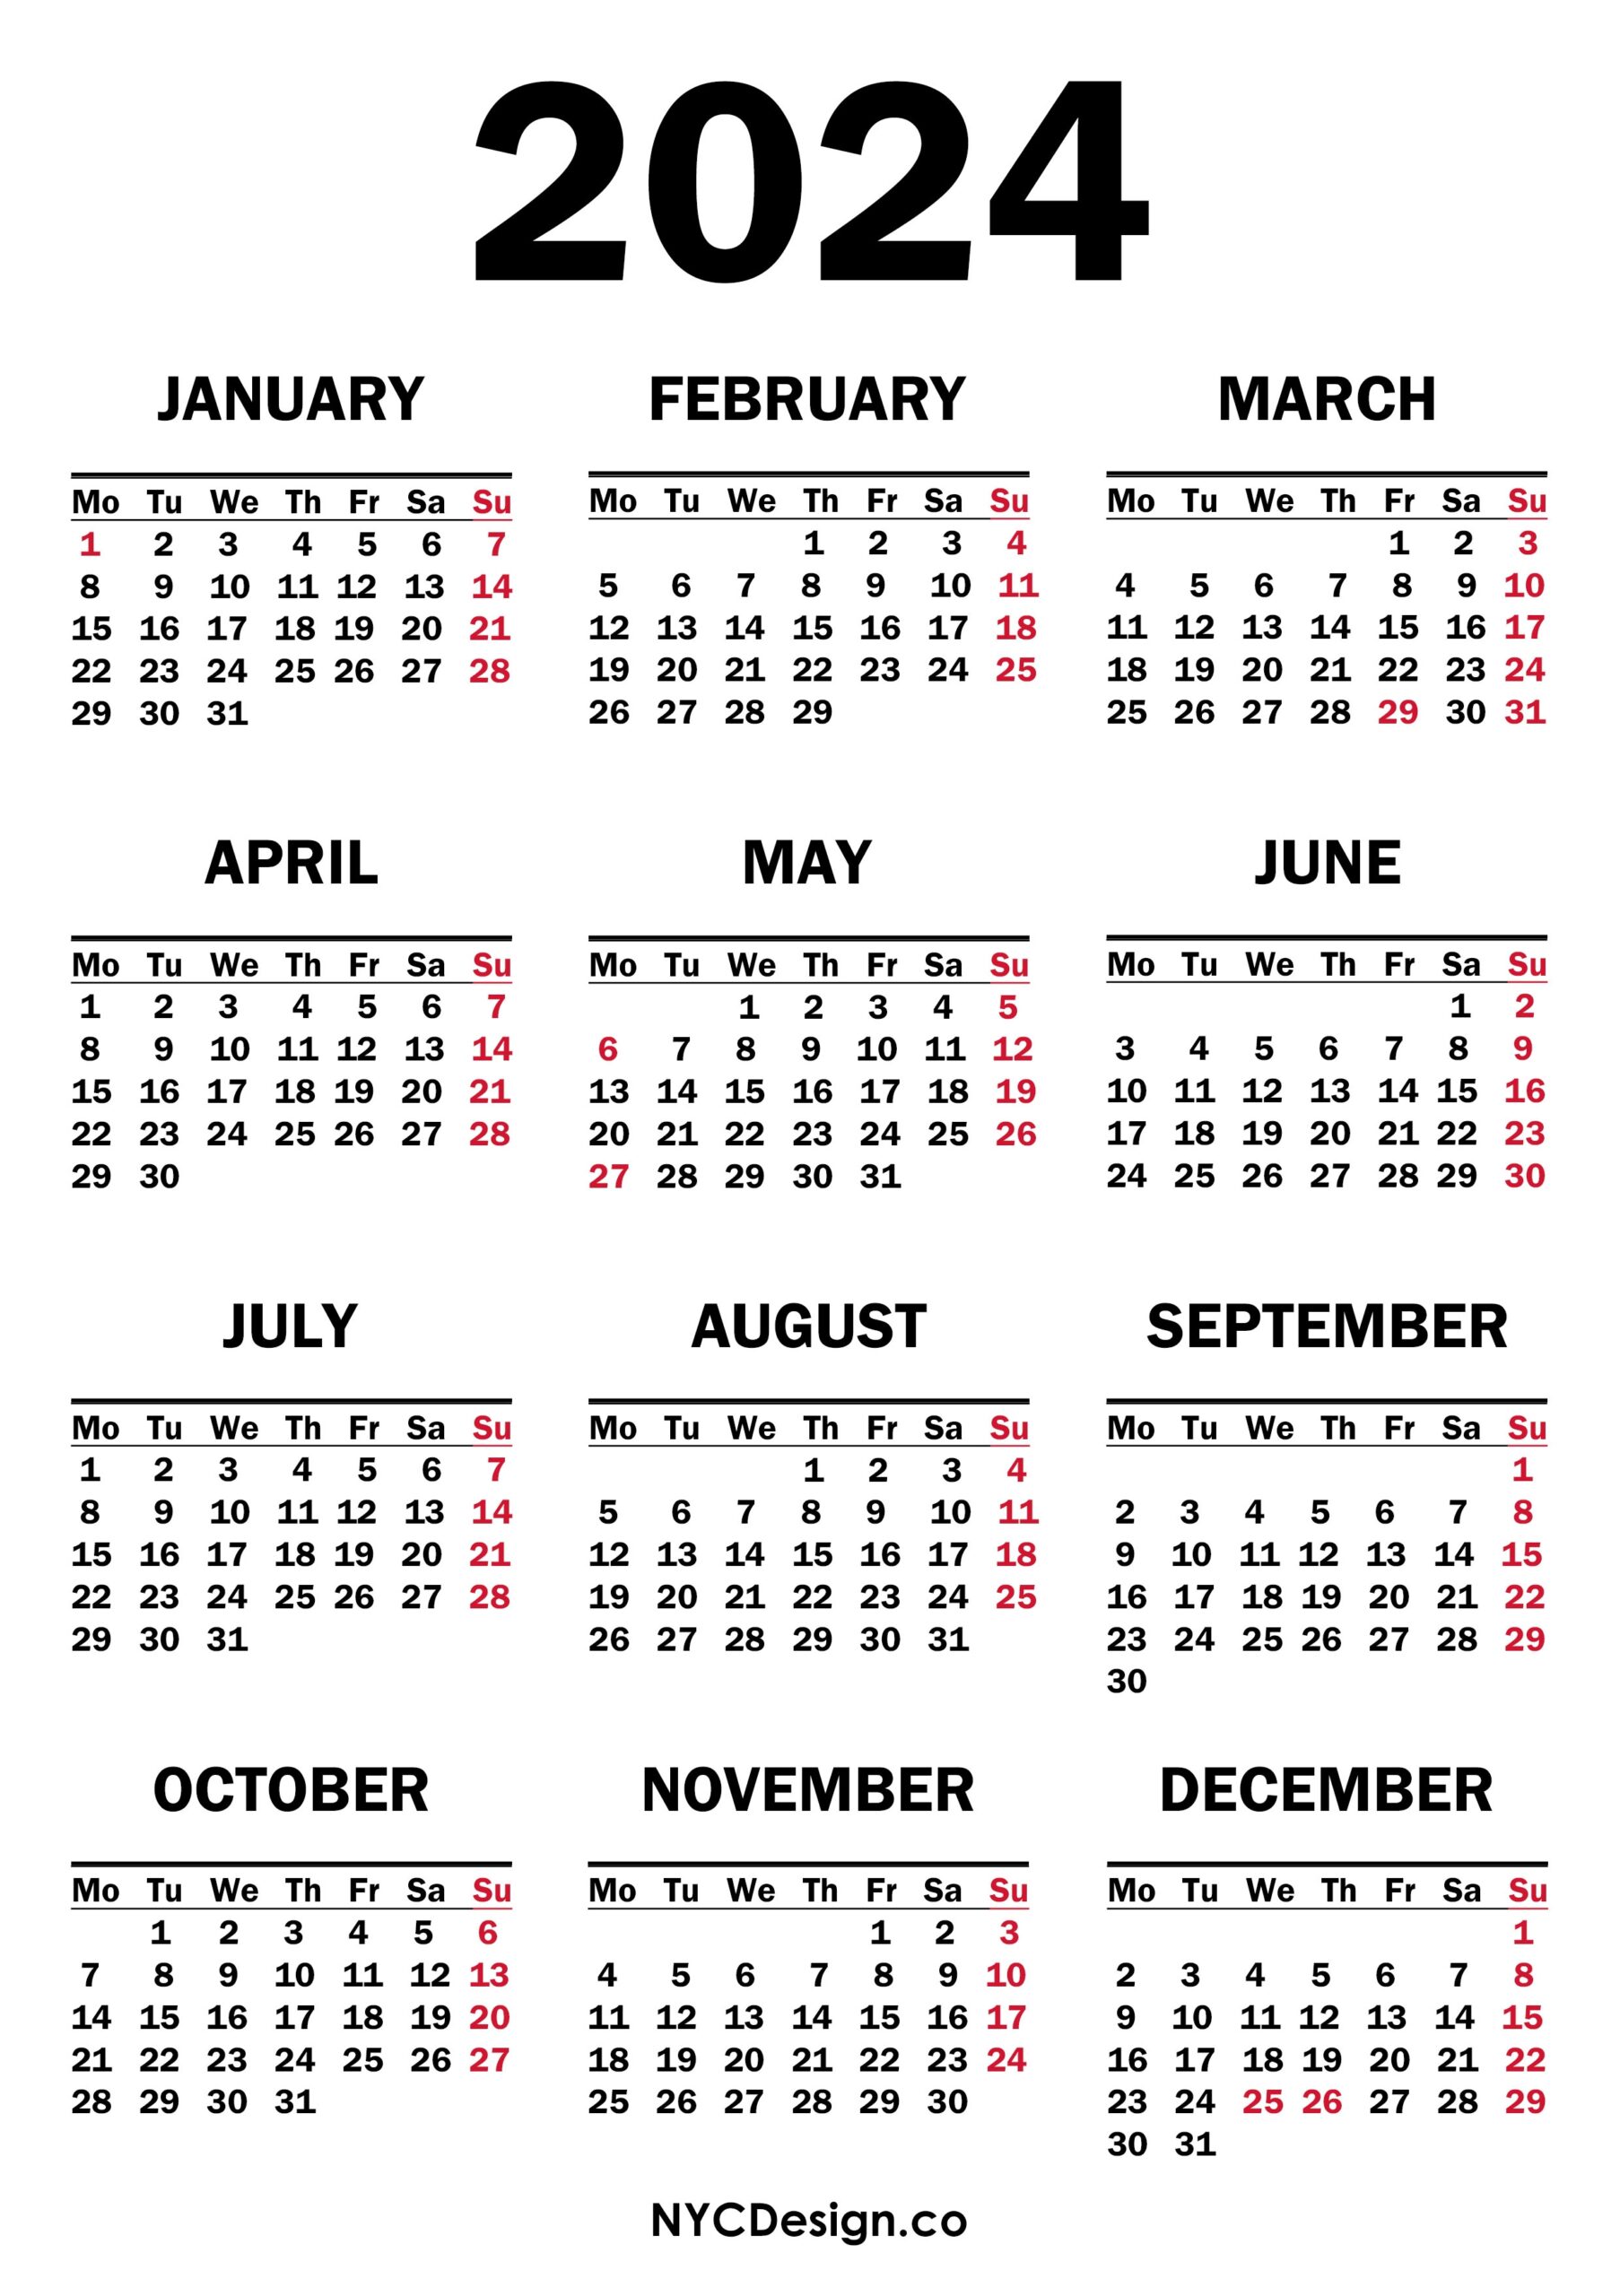 2024 Calendar With Holidays Printable Customize And Print - Free Printable 2024 Calendar With Holidays 2 Months Per Page